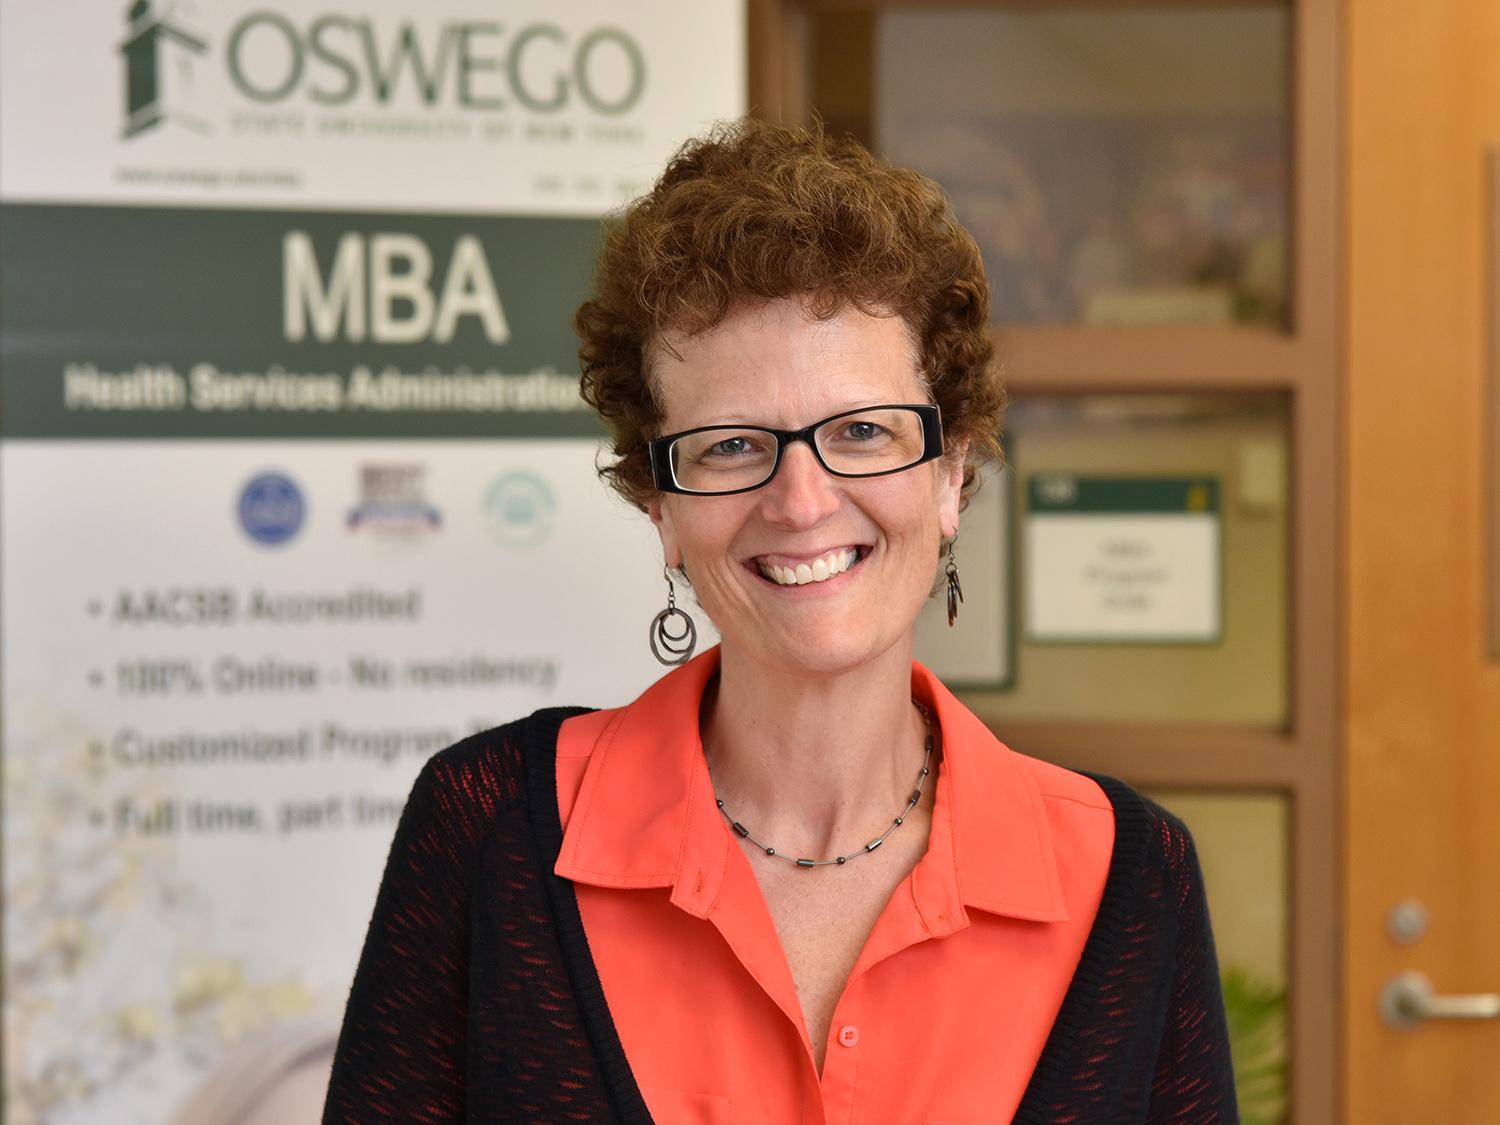 Melissa Arduini earned a statewide award for her exceptional work for Oswego's MBA program